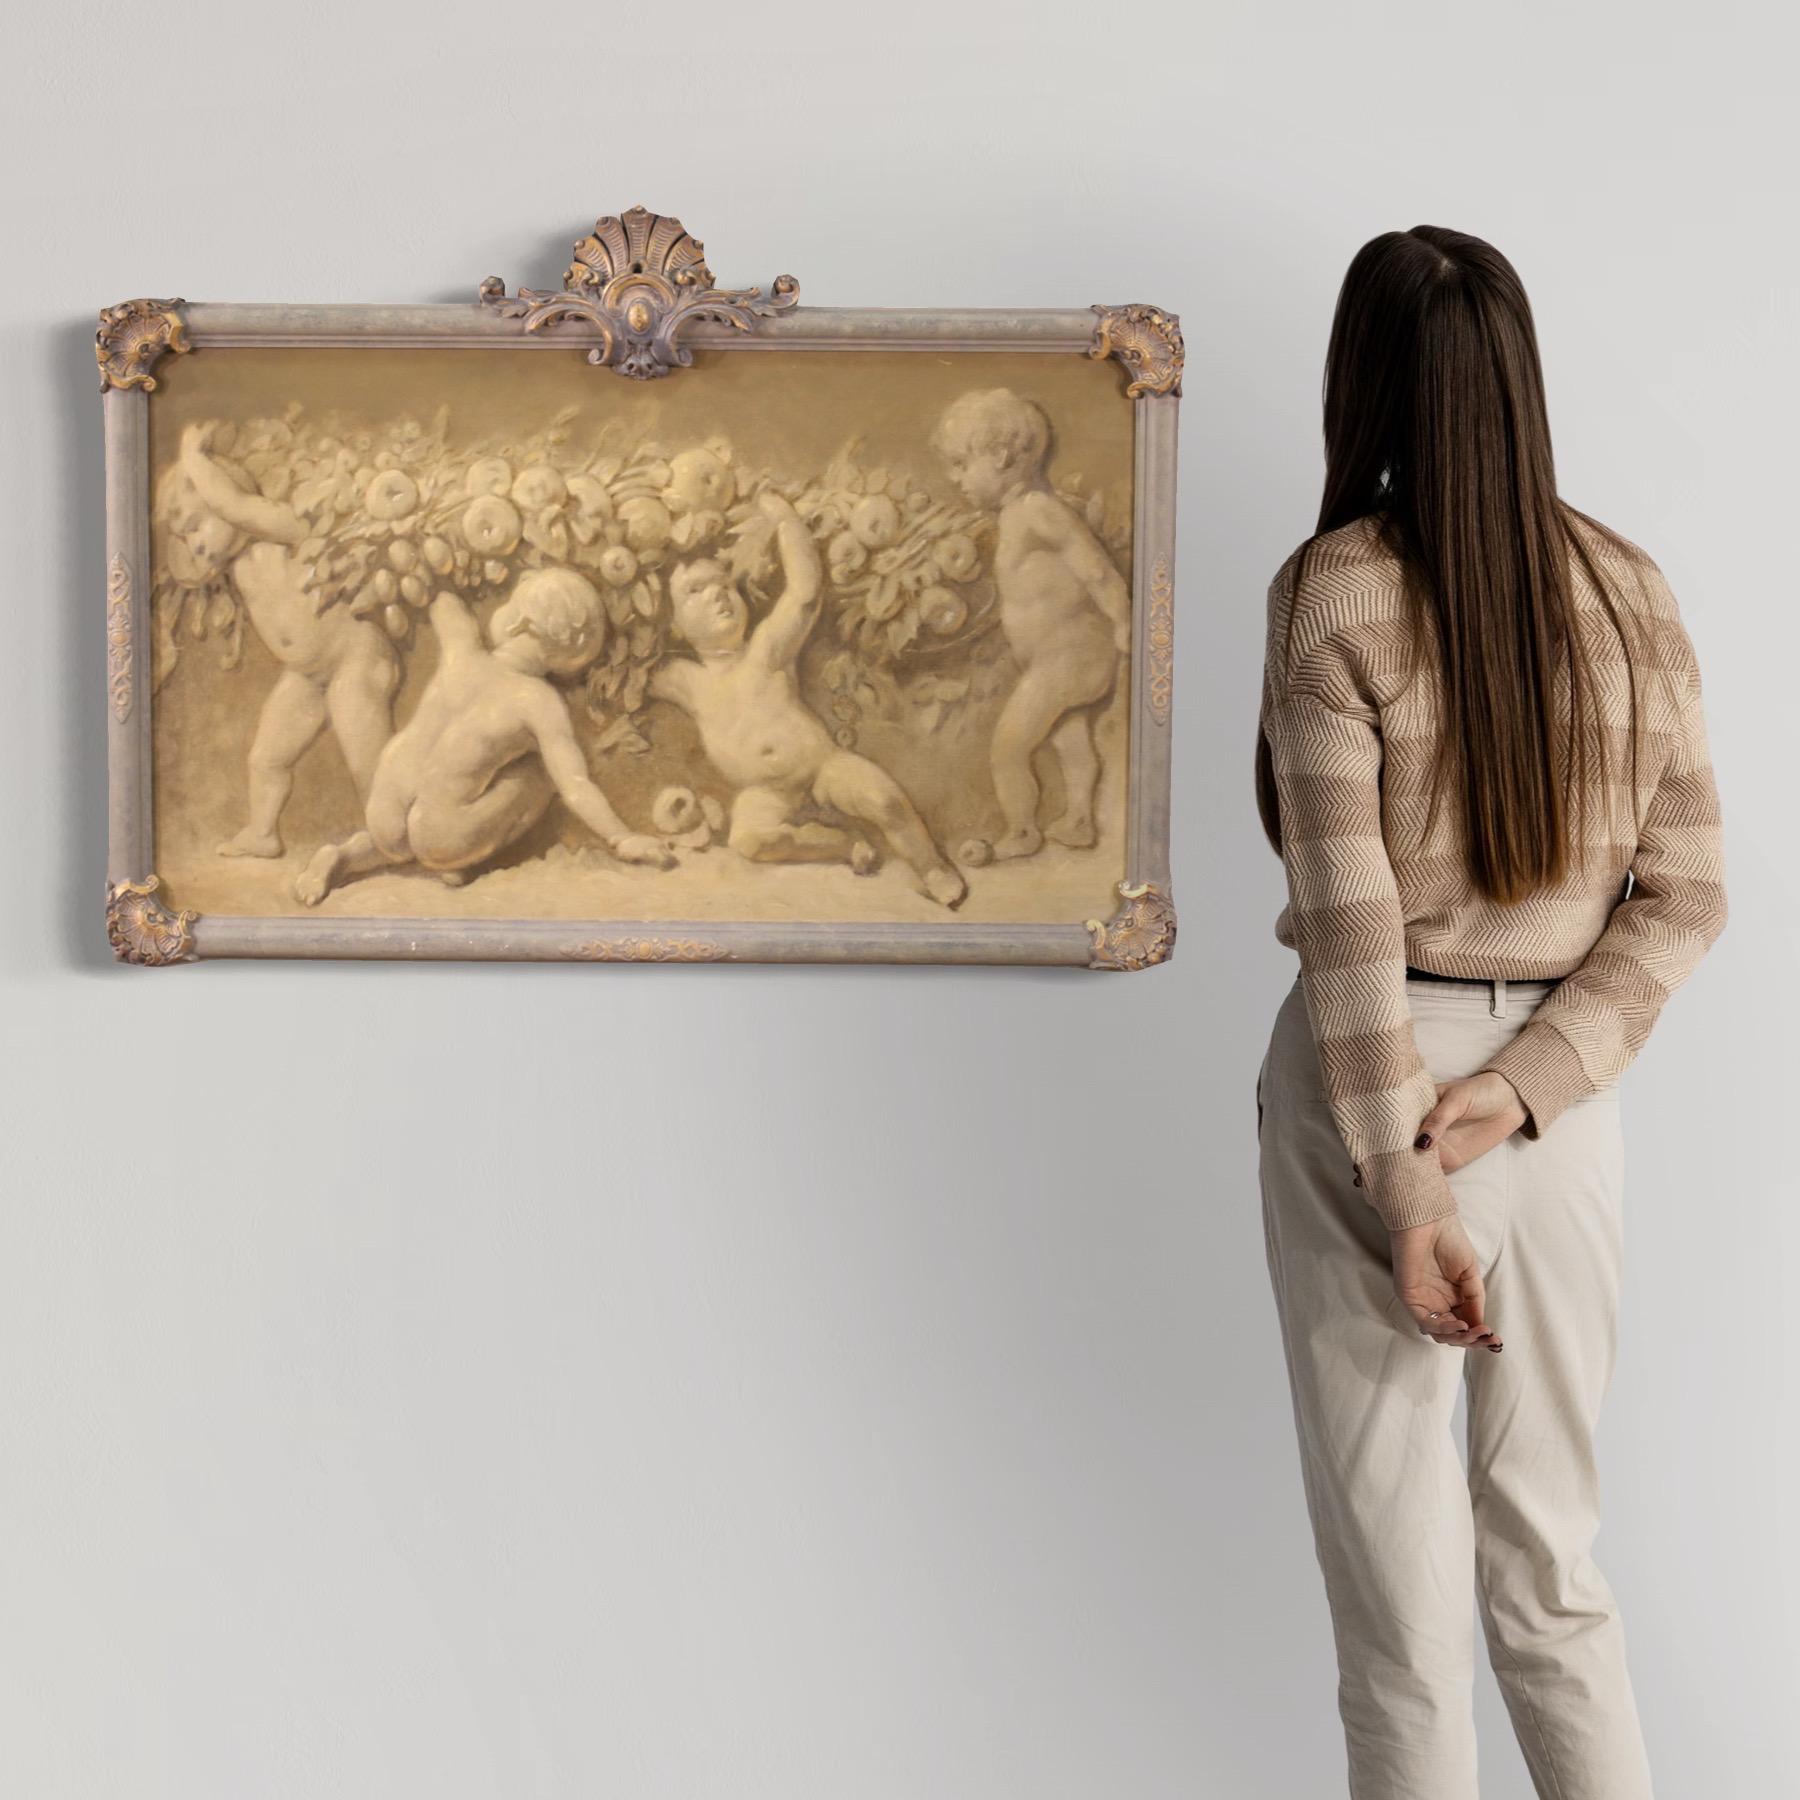 French painting from the first half of the 20th century. Artwork oil on canvas depicting cherubs with grisaille style garland, of good pictorial quality. Painting adorned with a wood and plaster frame, sculpted, lacquered and gilded with beautiful